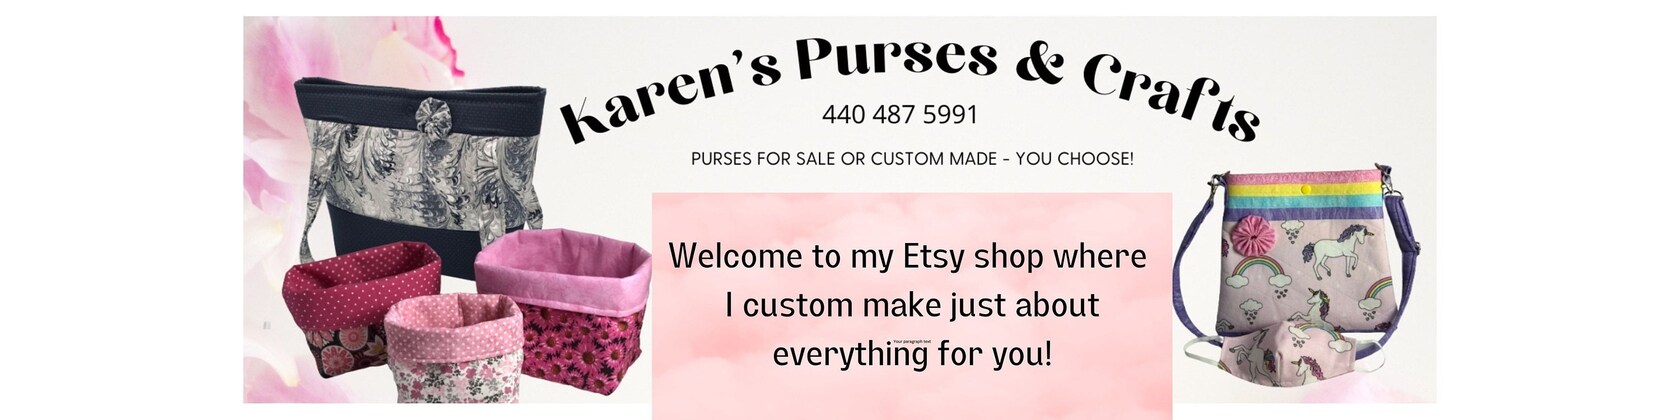 Hand Made Custom Concealed Carry Purses And Clutches by Ed's Custom  Leathercrafts | CustomMade.com